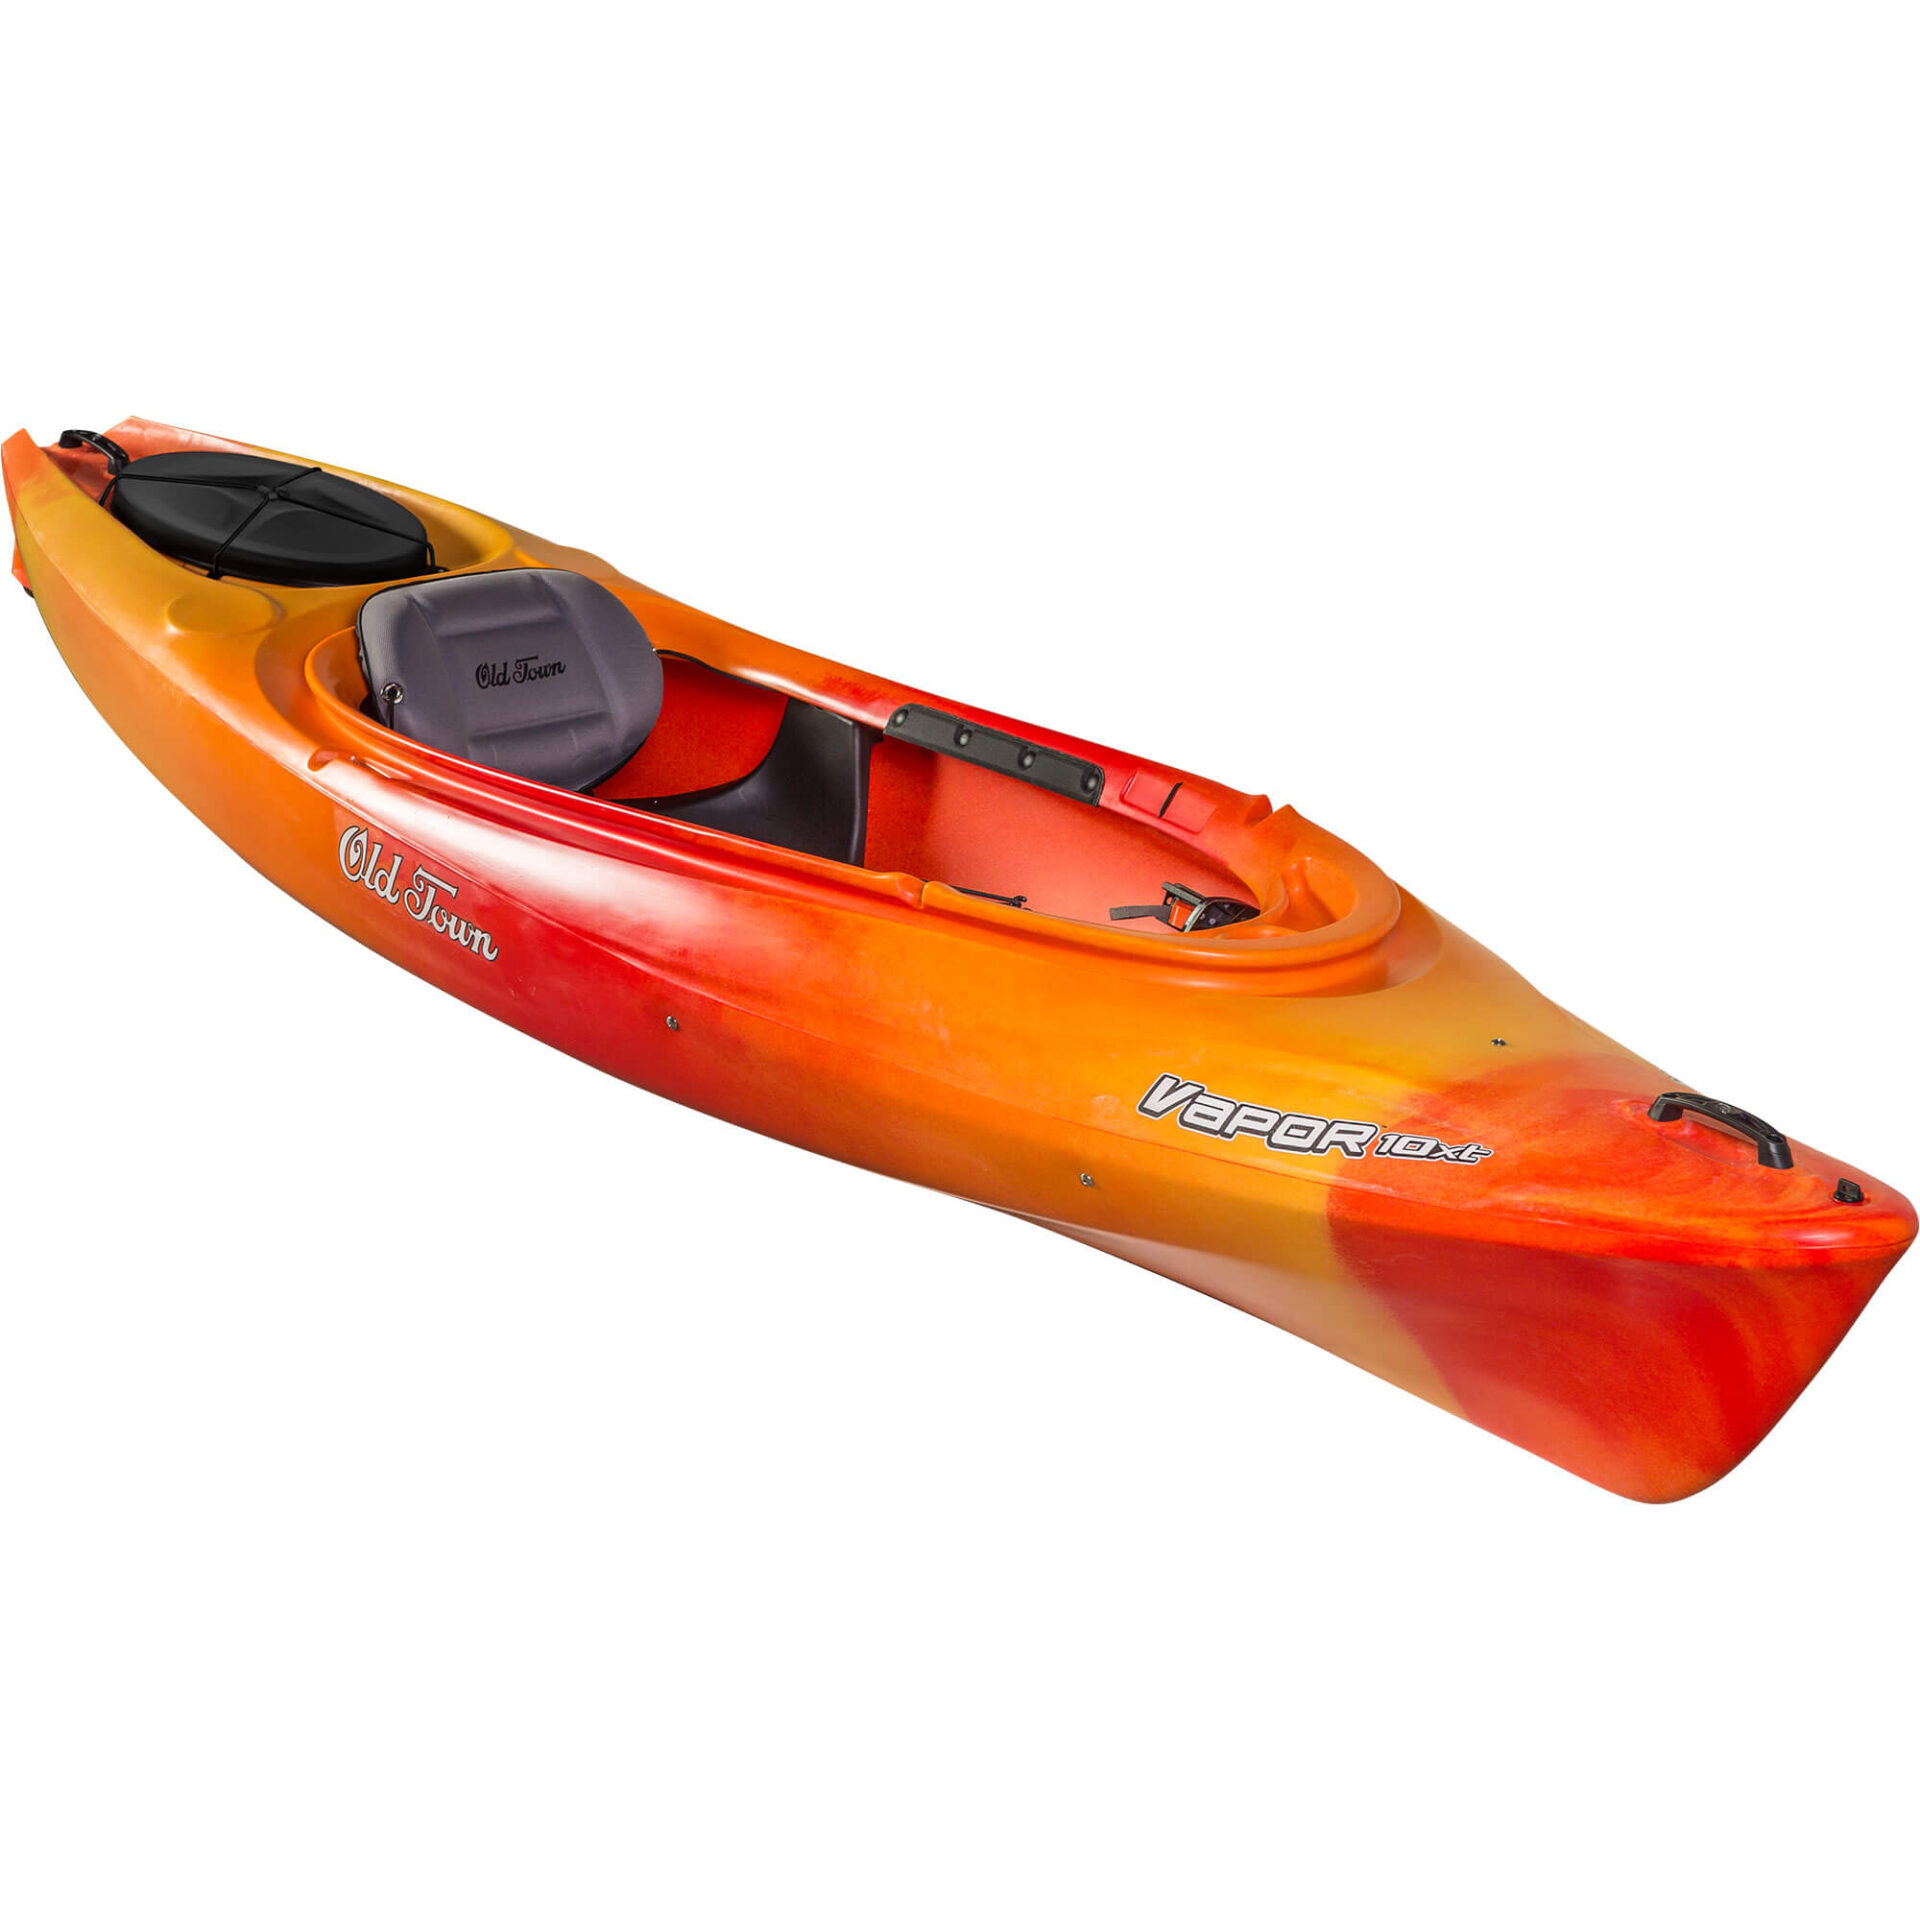 OLD TOWN VAPOR 10XT Paddle Sports item is available